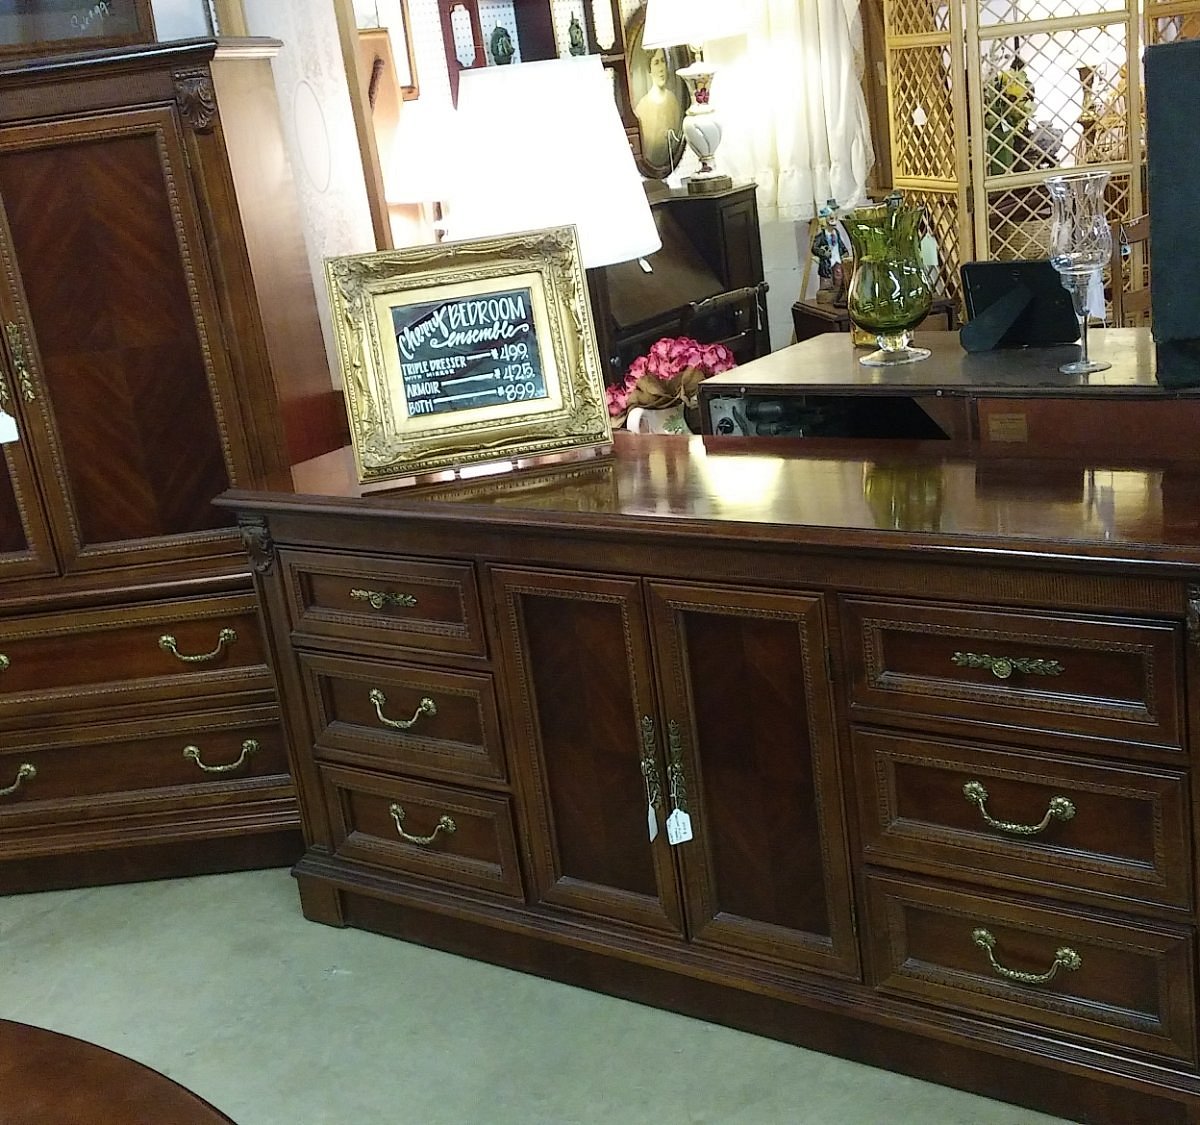 Top 10 Best Furniture Consignment Stores in Buffalo, NY - October